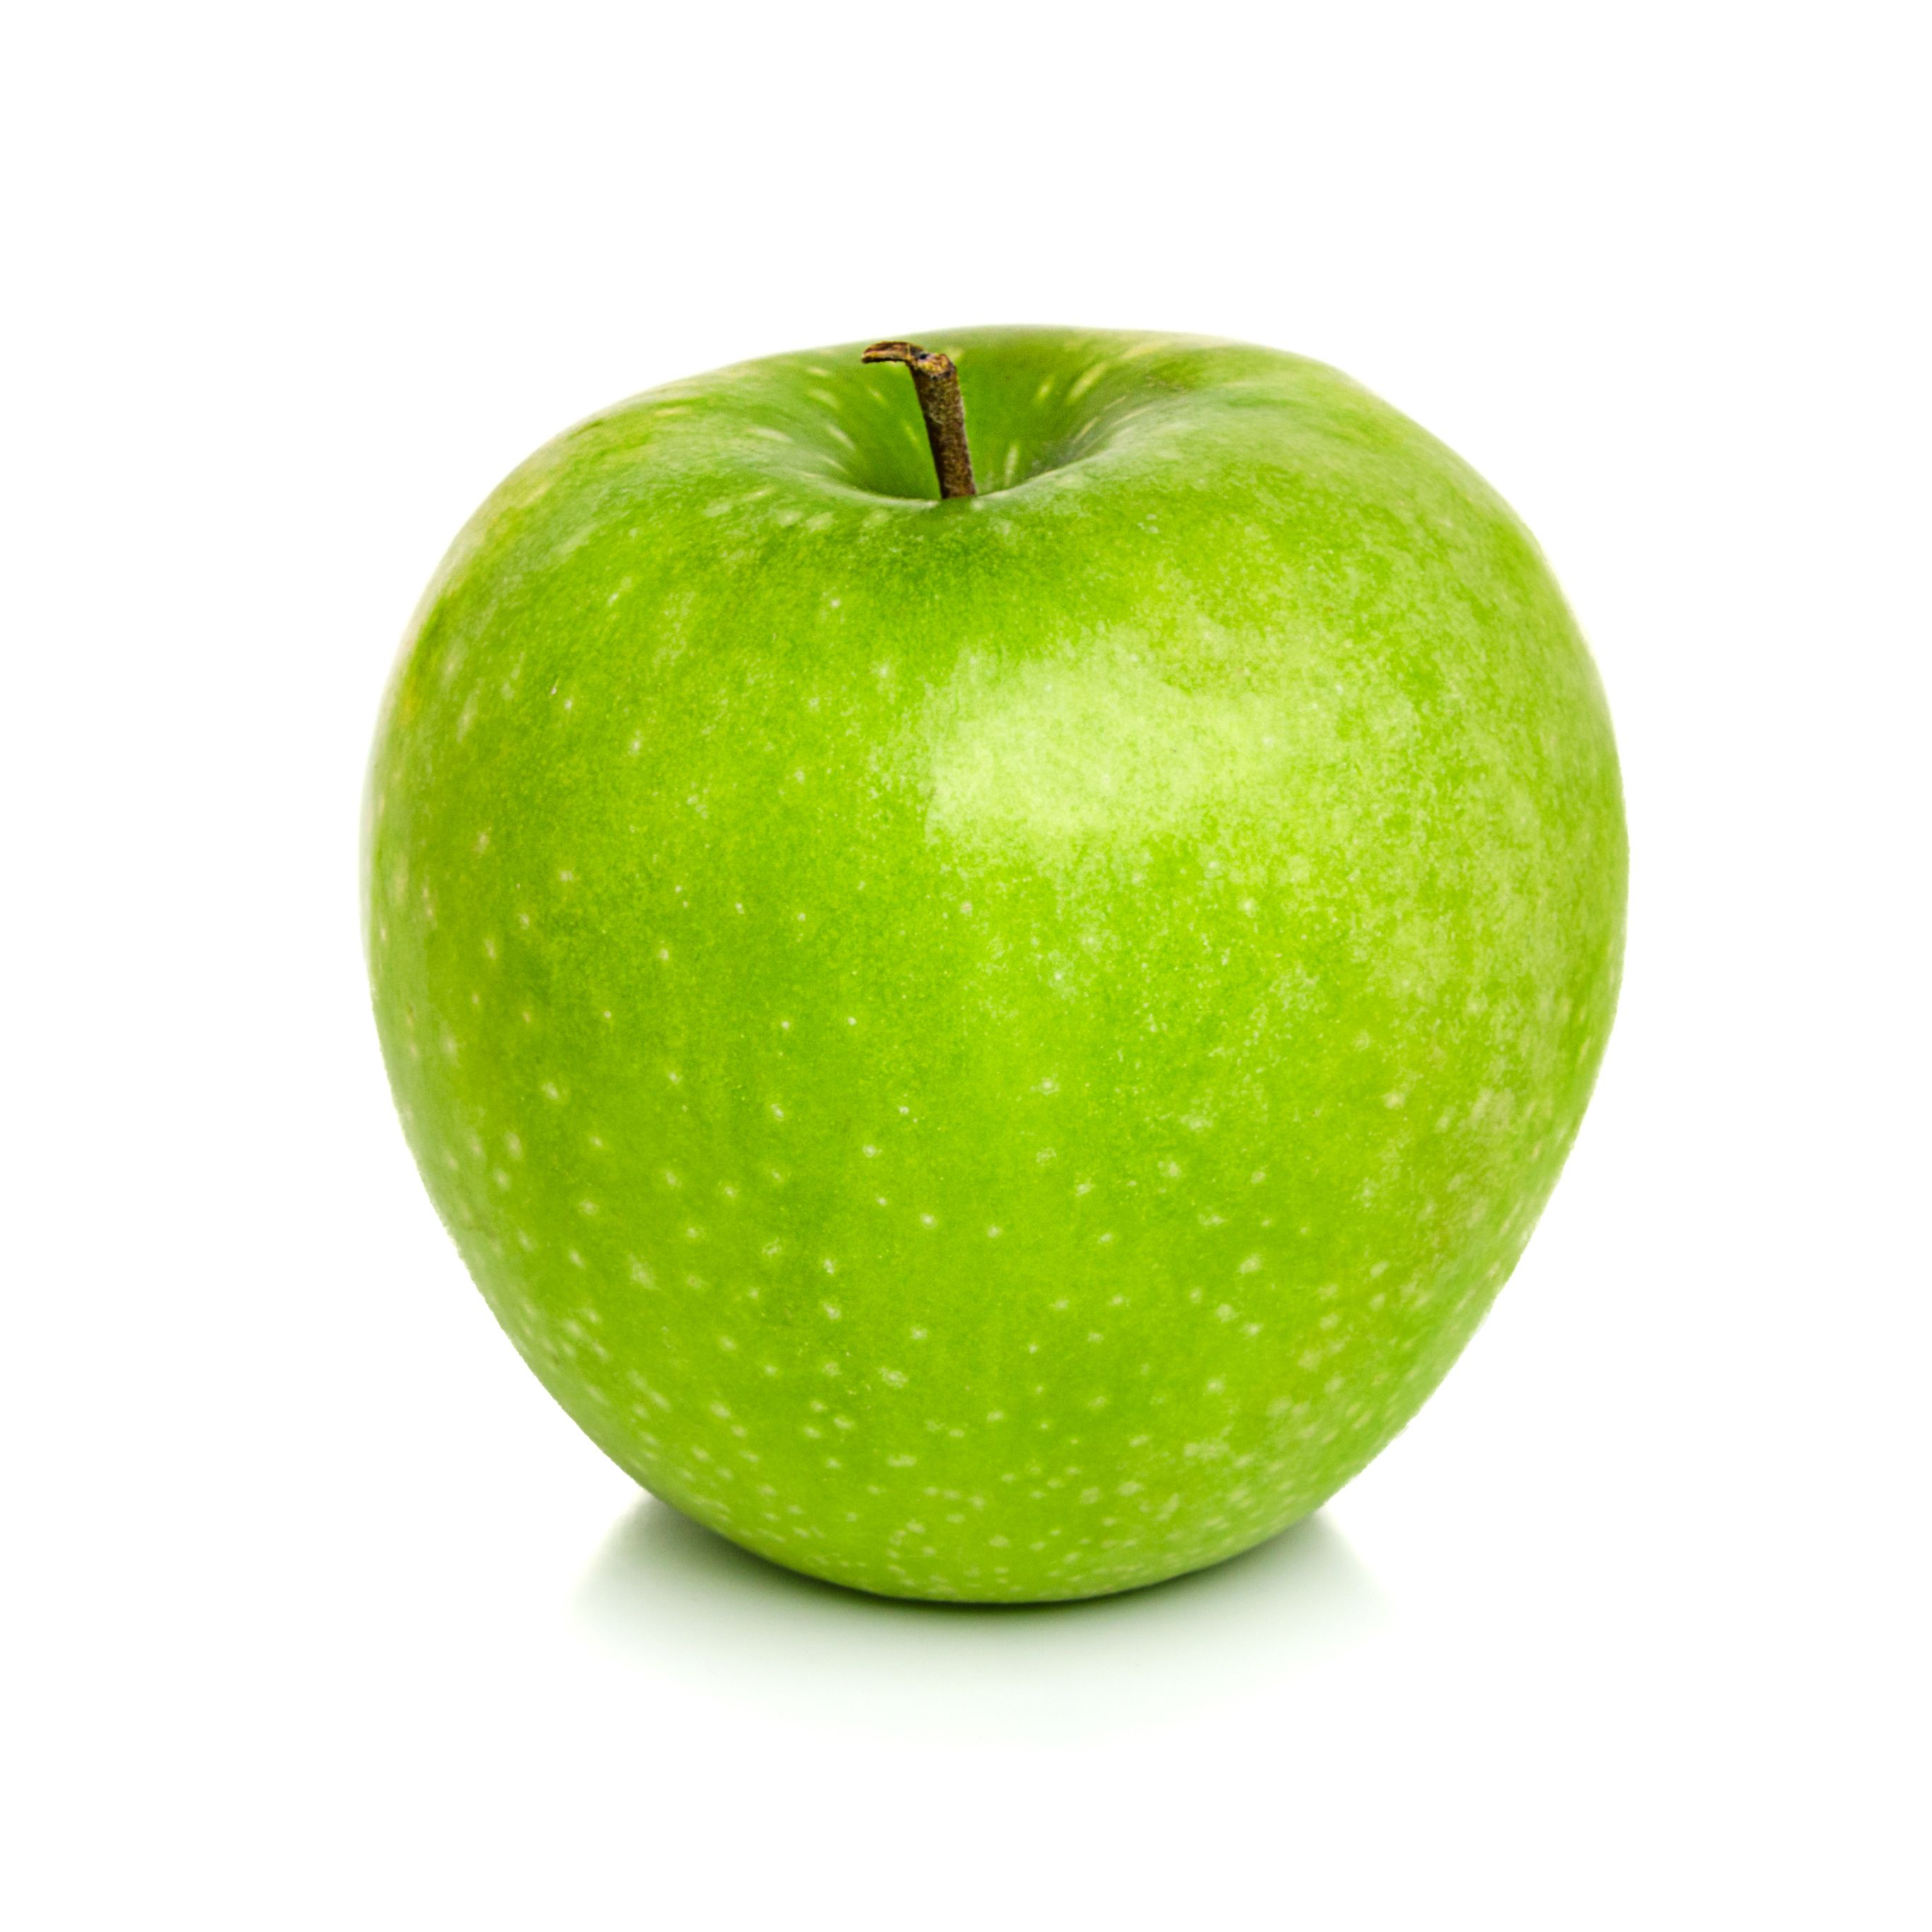 Types Of Apples - All The Common Apple Types